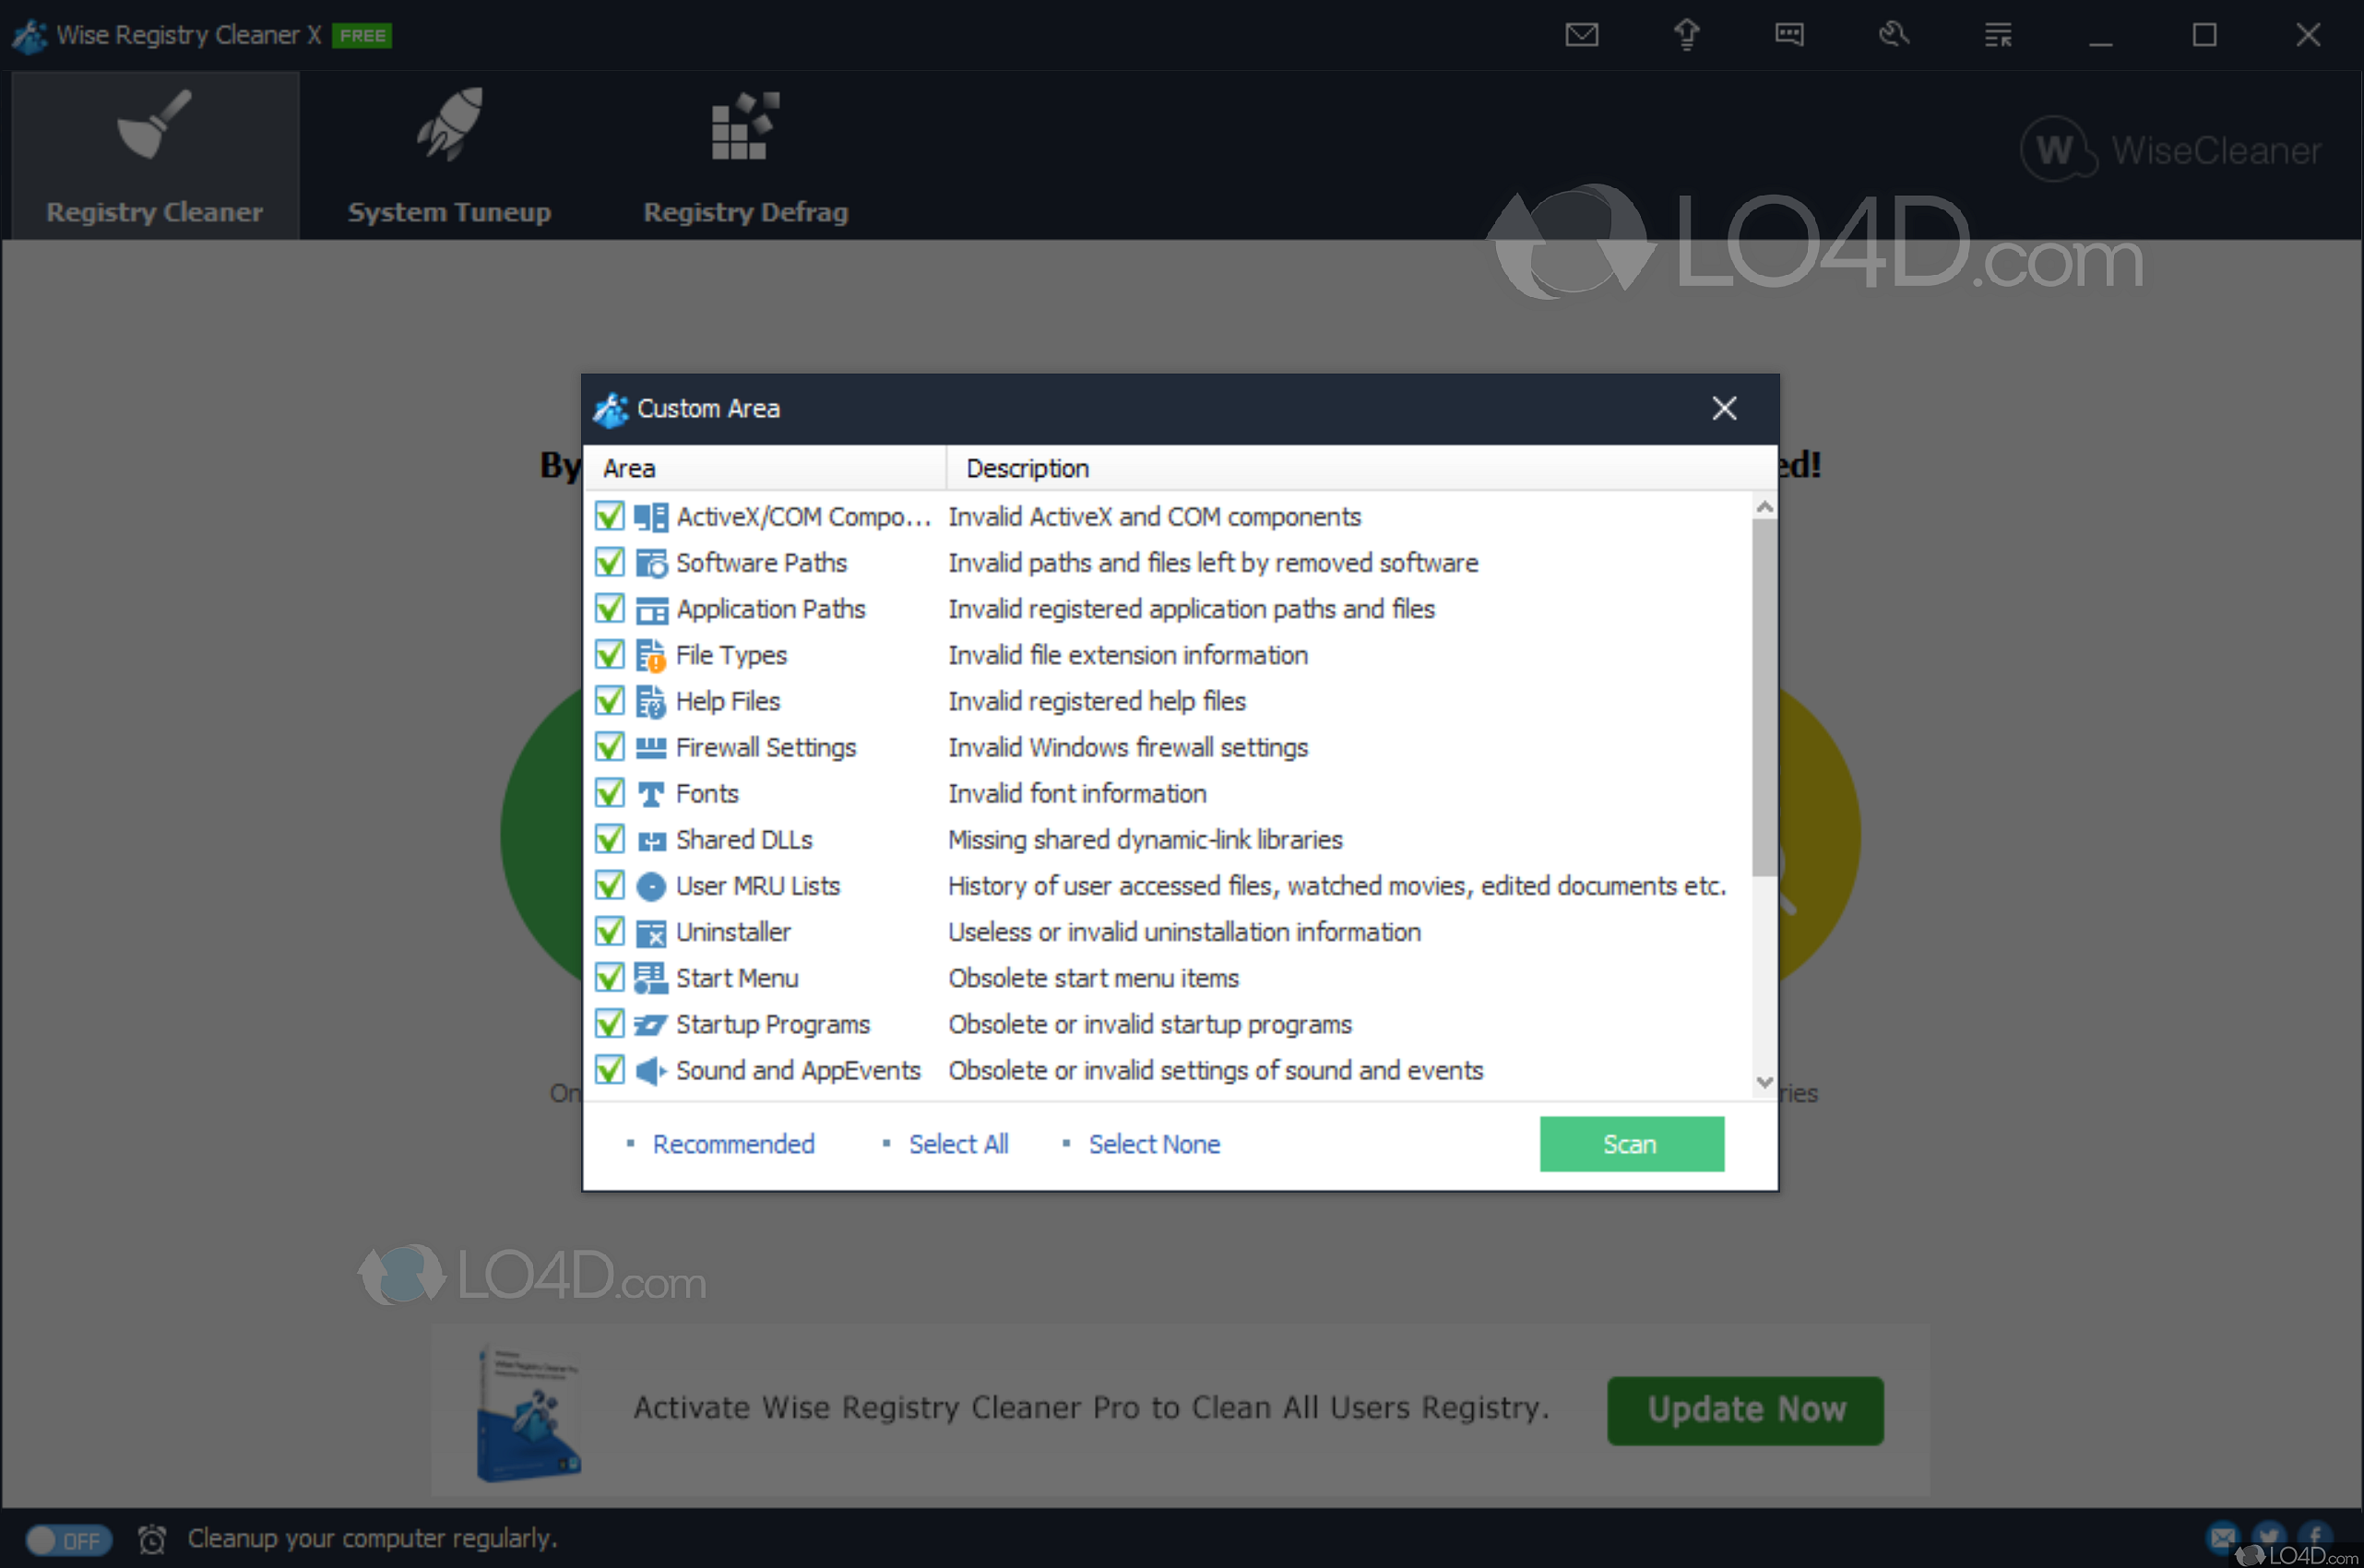 Wise Registry Cleaner Pro 11.1.1.716 free download